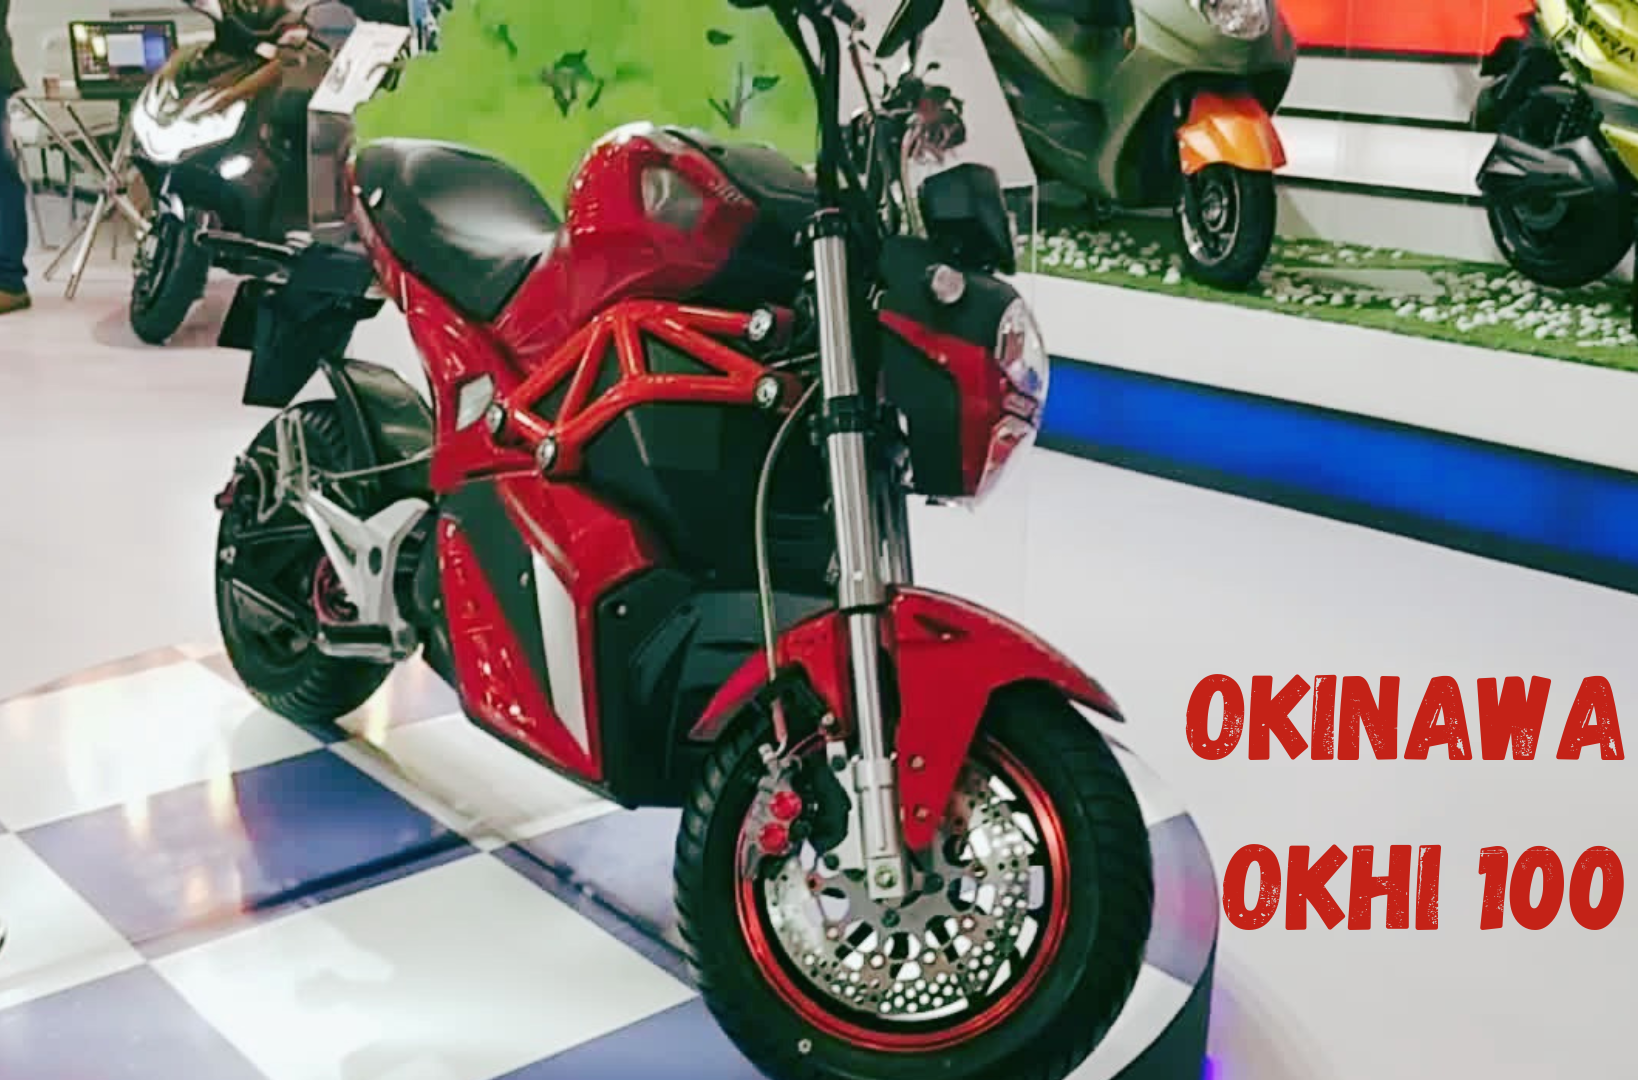 https://e-vehicleinfo.com/okinawa-okhi-100-electric-motorcycle-estimated-price-specs-launch-highlights/